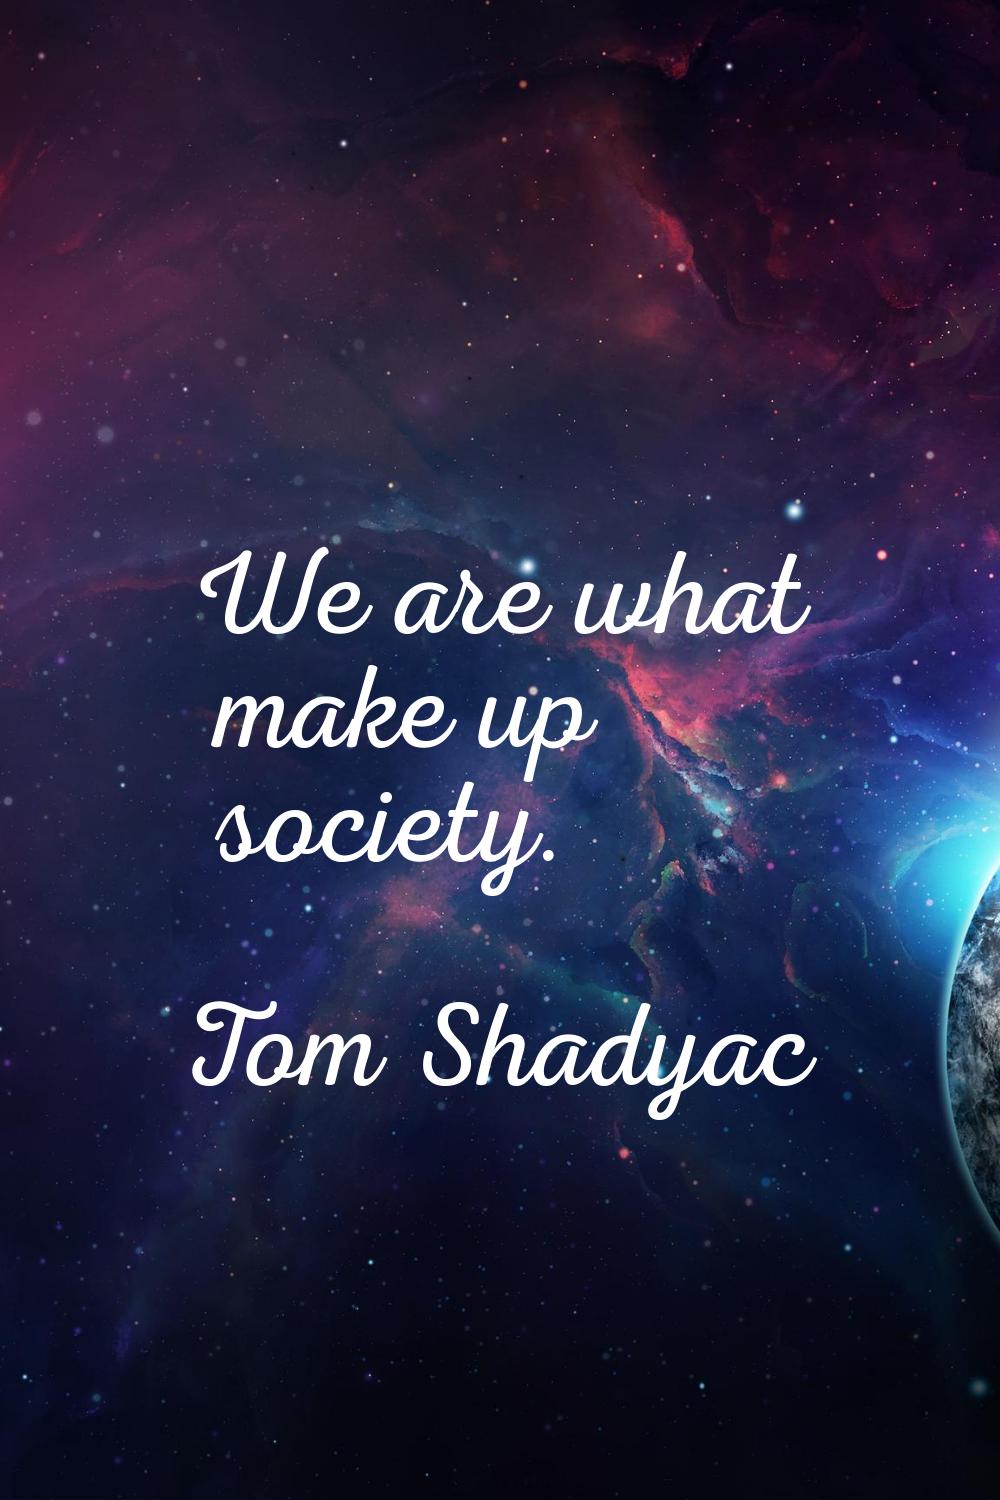 We are what make up society.